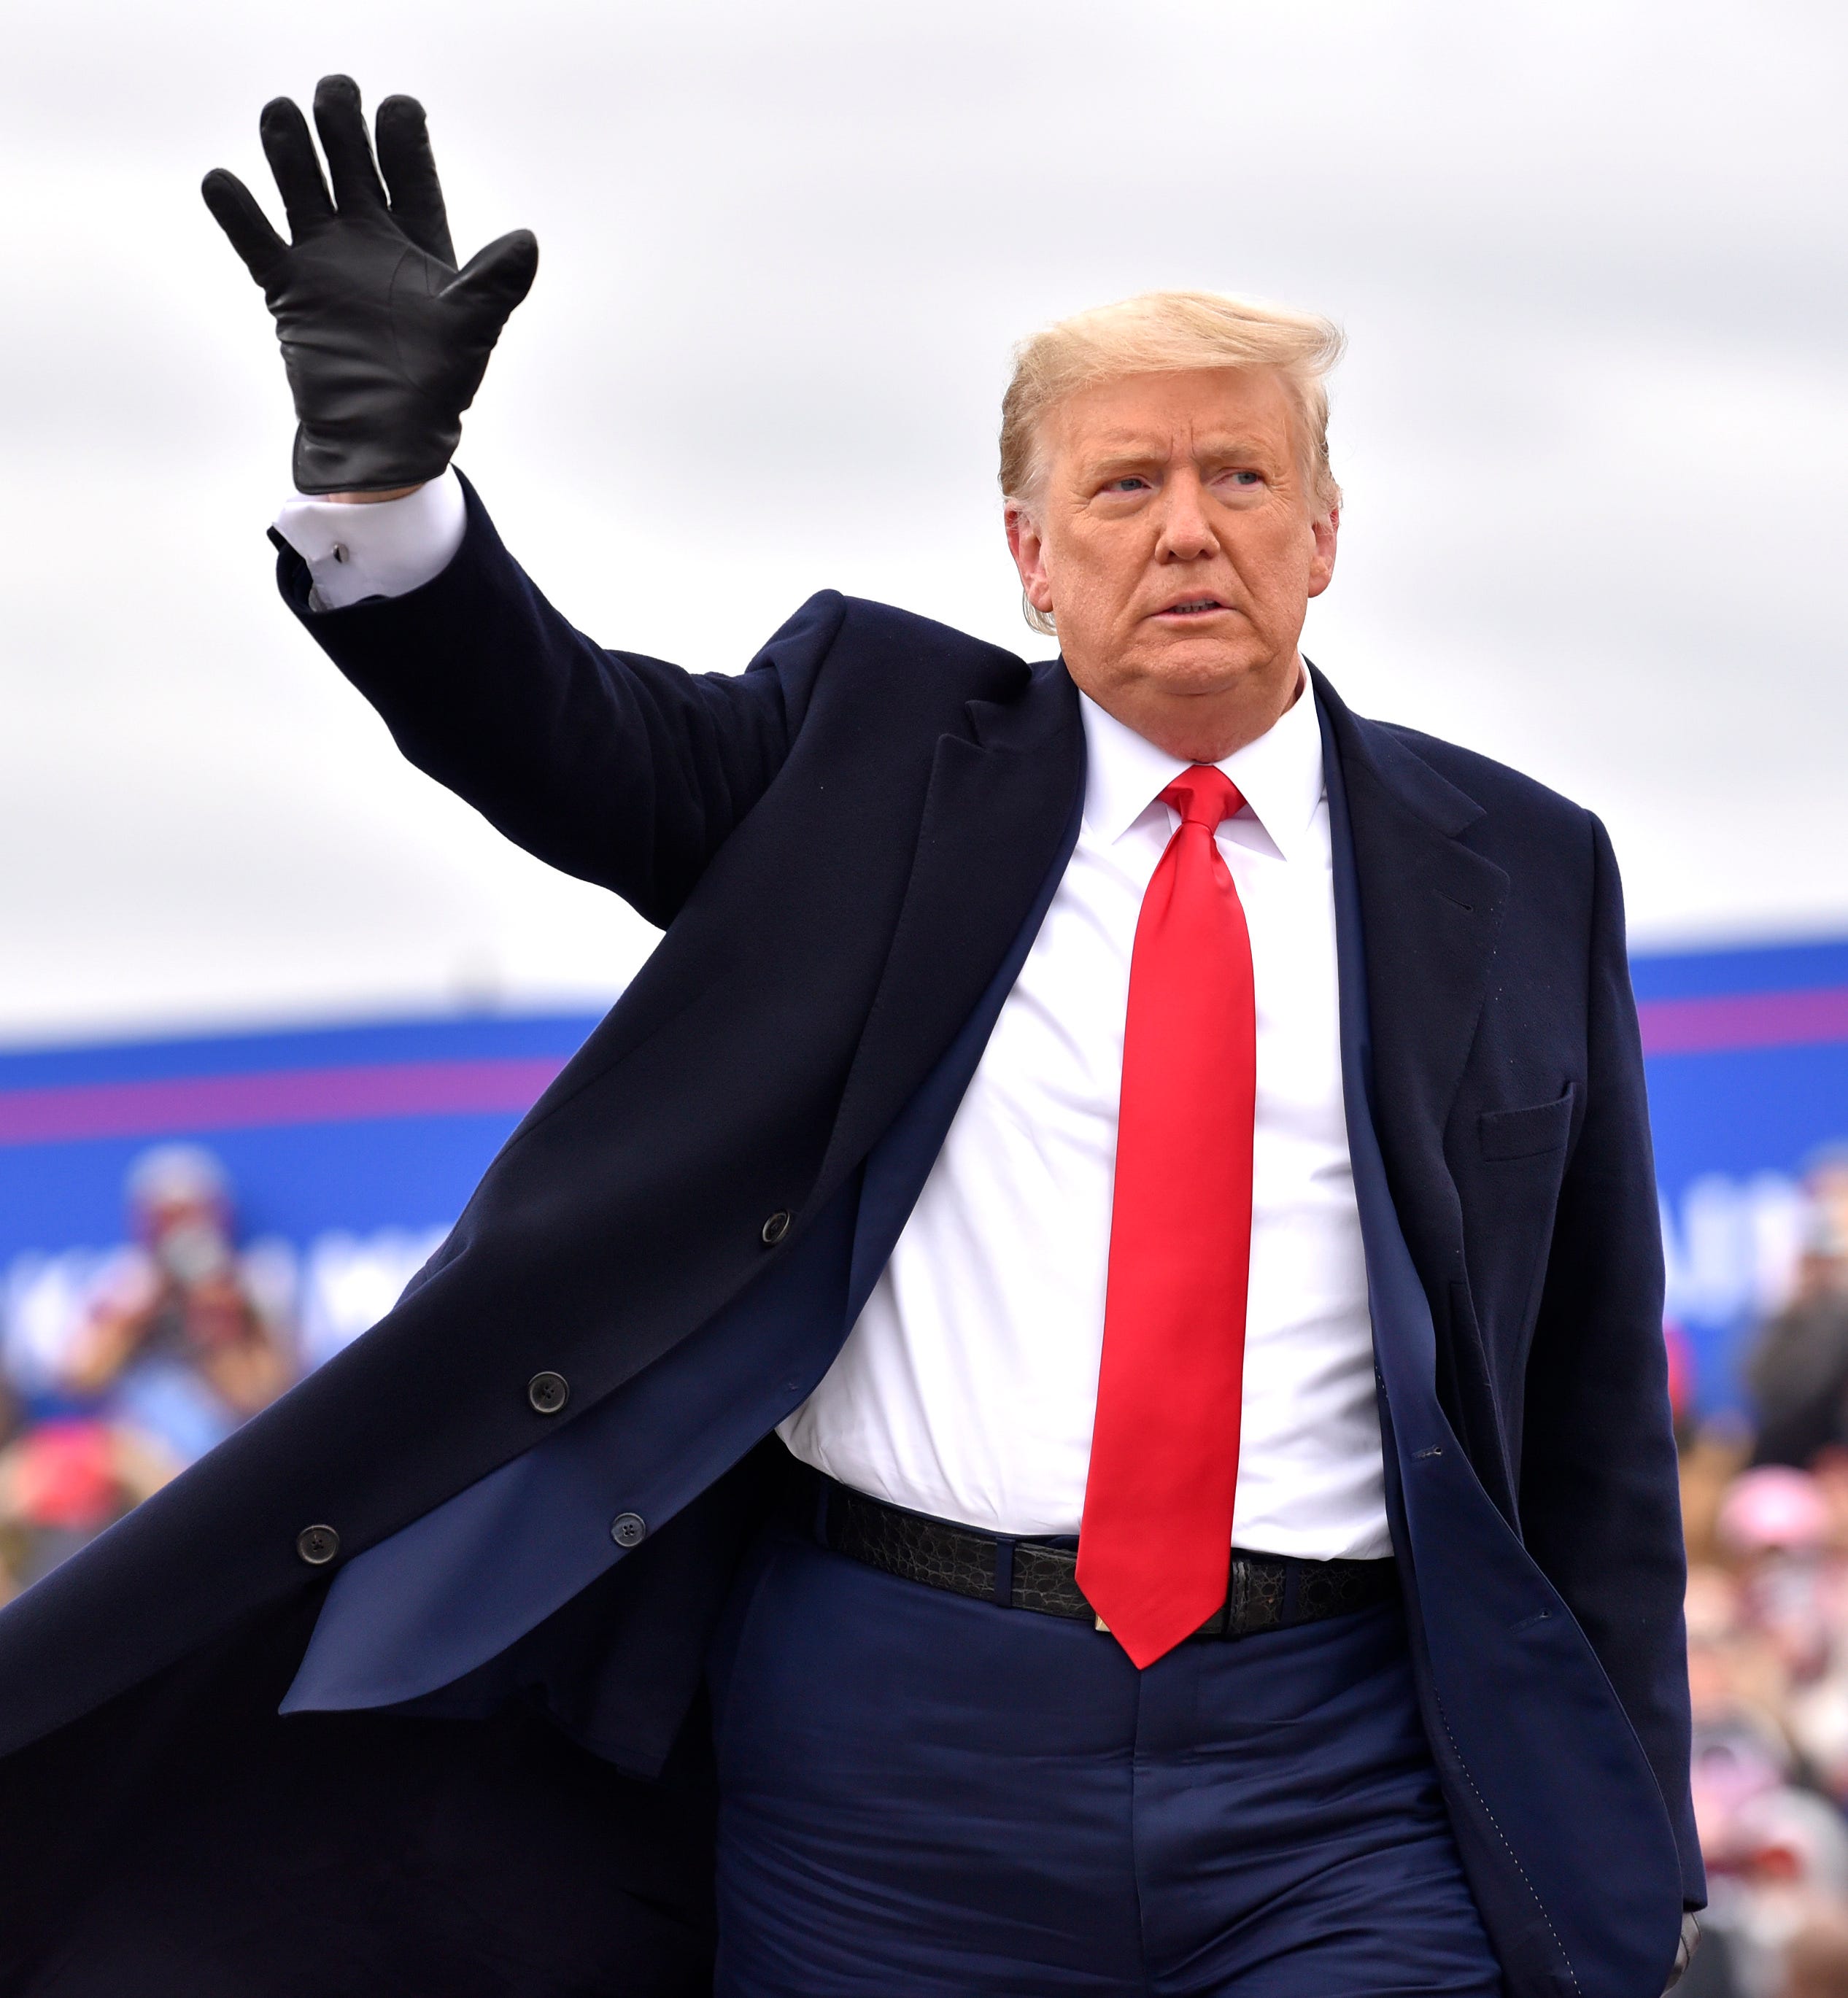 President Trump waves to supporters after speaking at the Oakland International Airport in Waterford Twp., Friday, October 30, 2020, for his Make America Great Again Victory Rally.